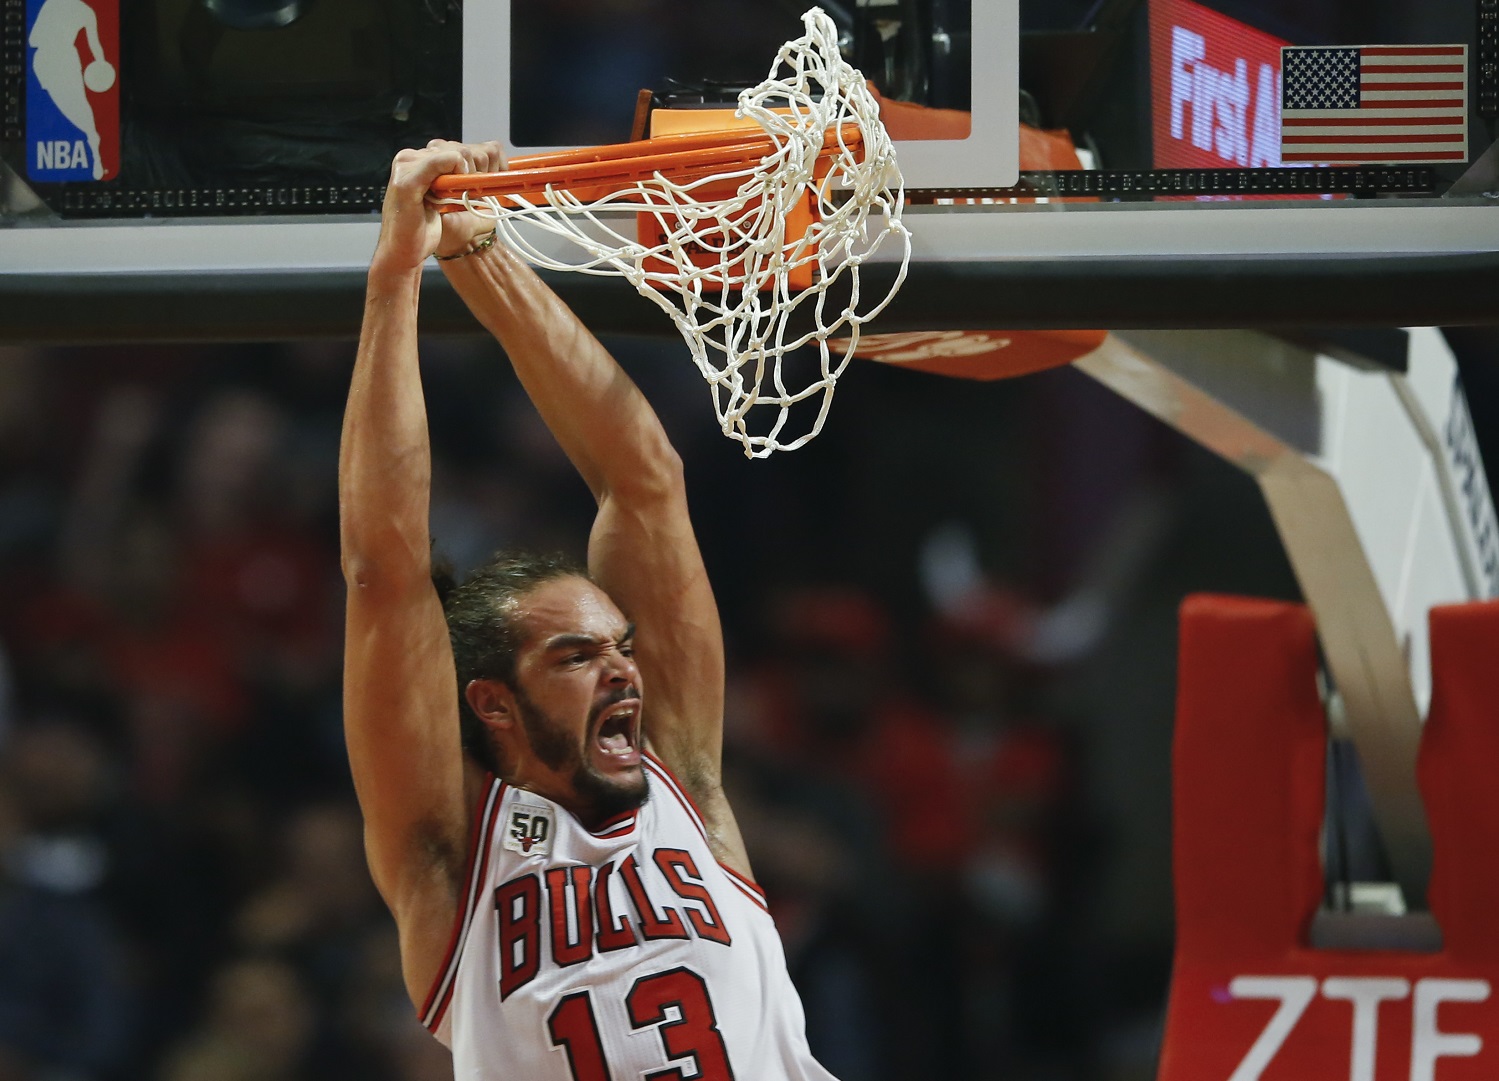 FILE- In this Nov. 1, 2015, file photo, Chicago Bulls center Joakim Noah, reacts after scoring against the Orlando Magic, during the first half of an NBA basketball game in Chicago. A person with knowledge of the details says Joakim Noah and the New York Knicks have agreed to a four-year deal. The deal was agreed to Friday, July 1, 2016, the person told The Associated Press on condition of anonymity because deals cannot be signed until July 7. (AP Photo/Kamil Krzaczynski, File)